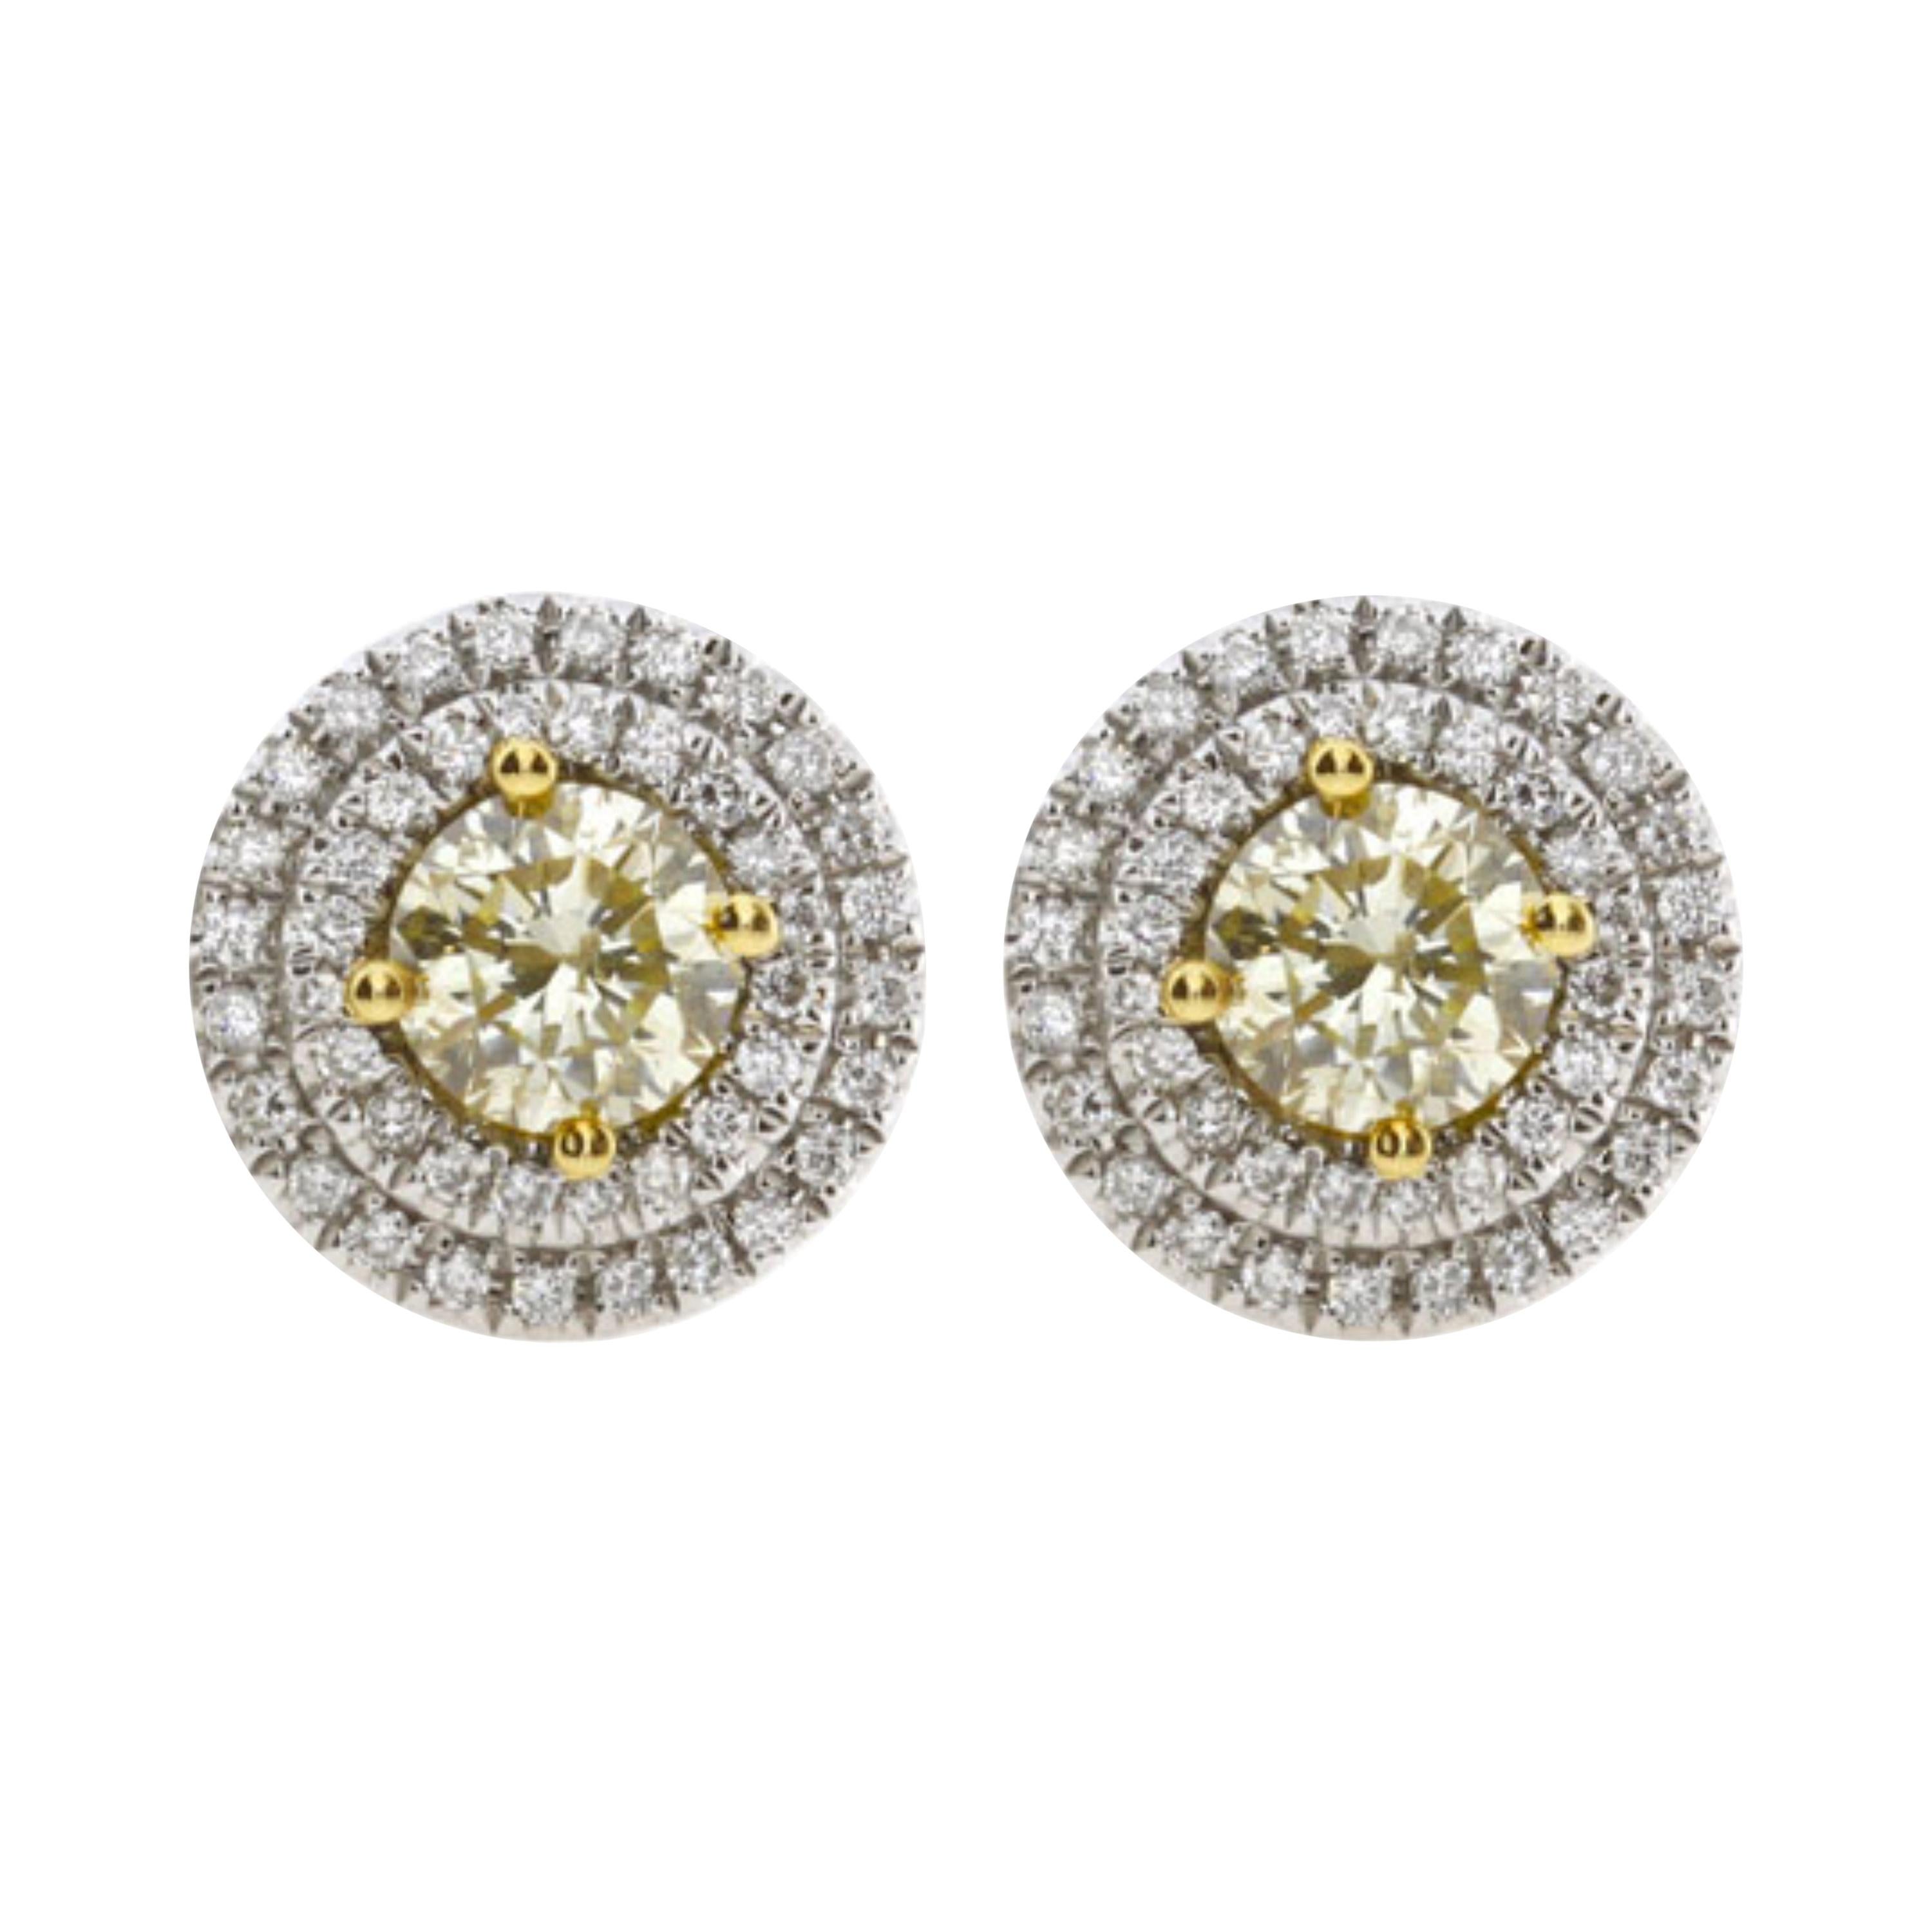 1.02 Carat Natural Fancy Yellow Diamond Stud Earrings with Double Halo